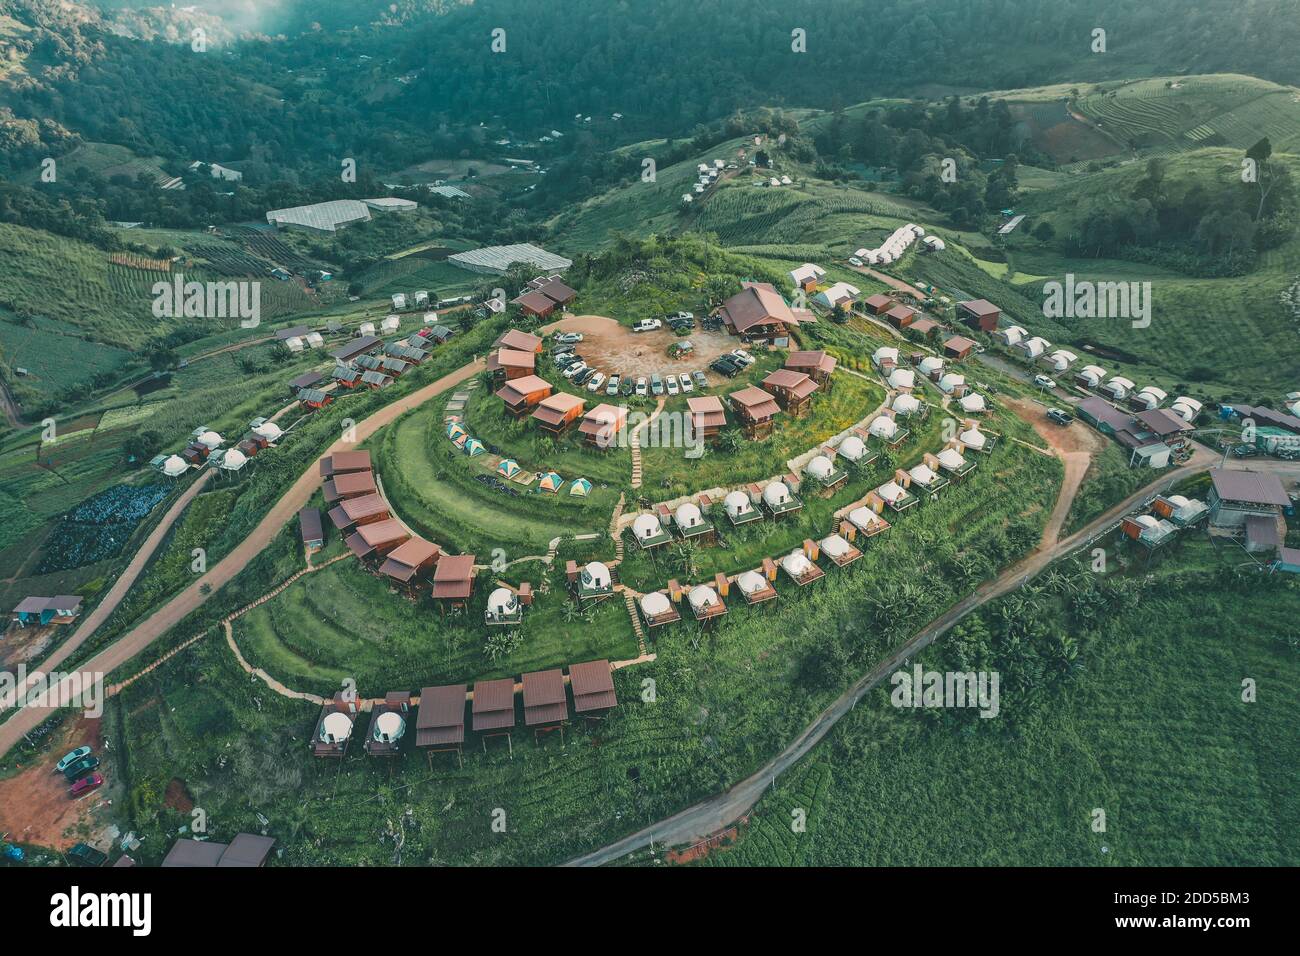 Aerial view of camping grounds and tents on Doi Mon Cham mountain in Mae Rim, Chiang Mai province, Thailand Stock Photo